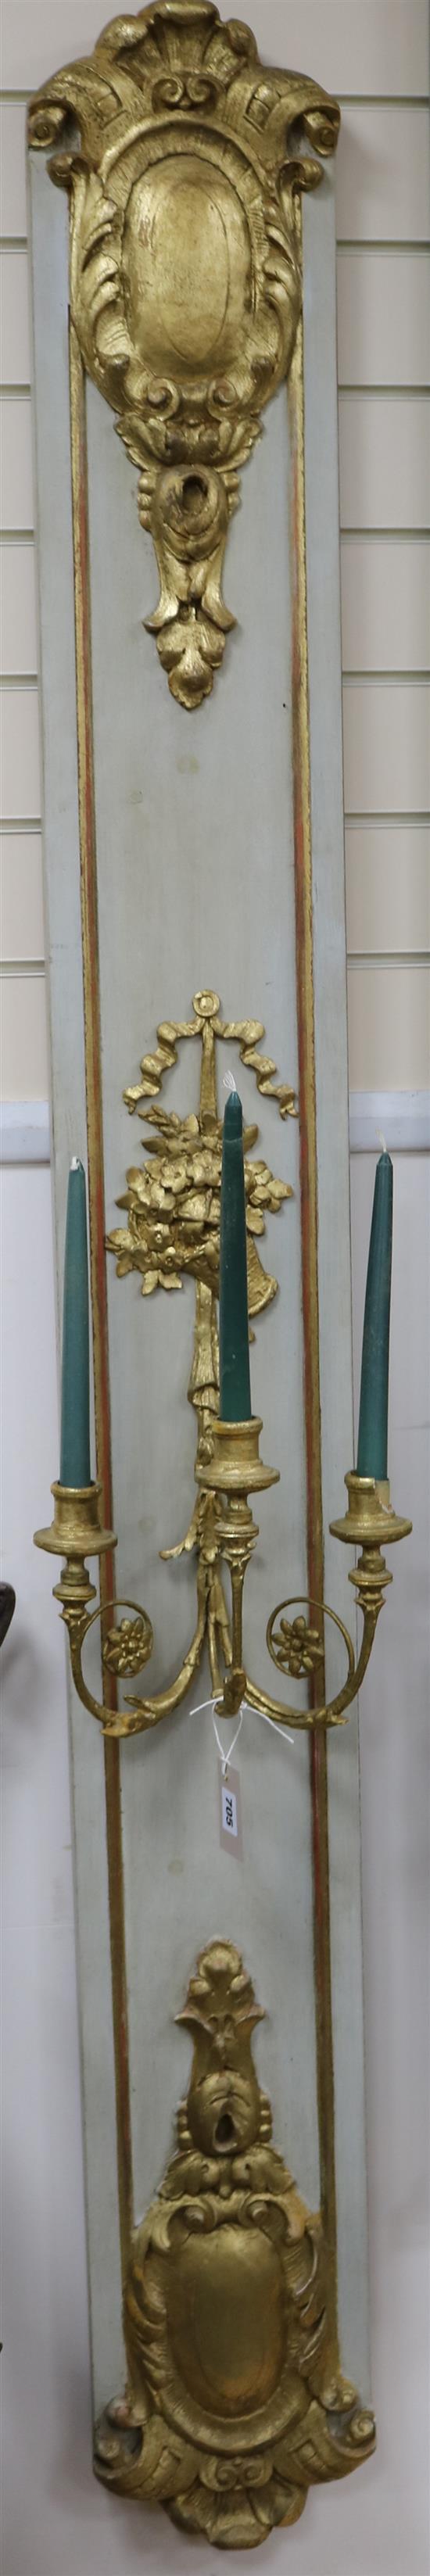 A pair of French painted and parcel gilt wall appliqués, H.185cm